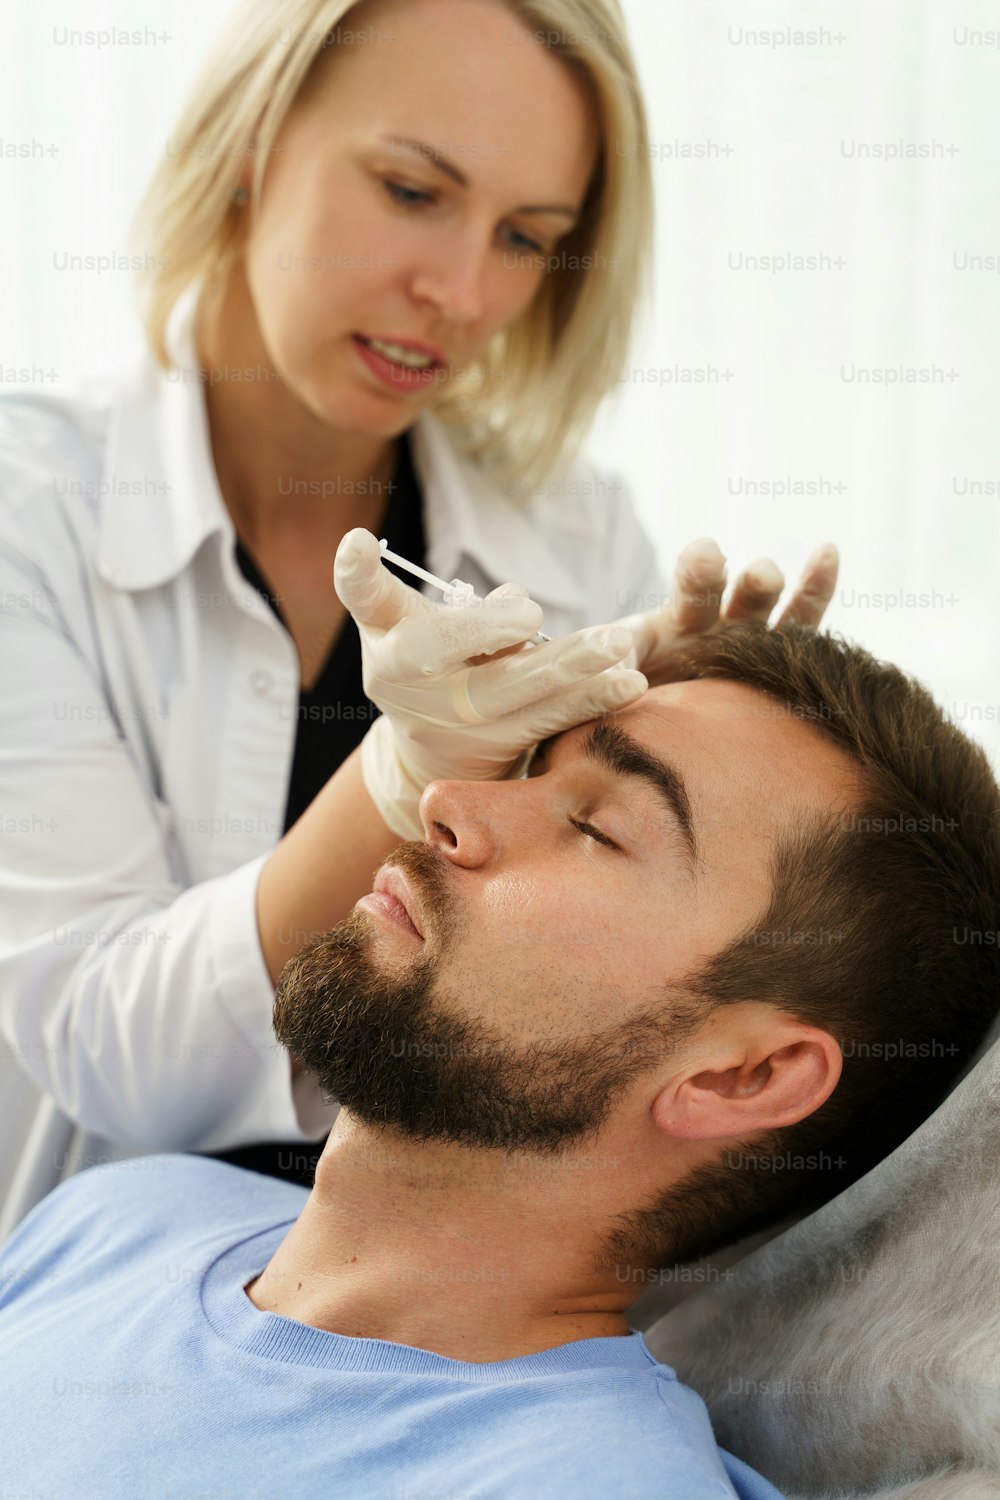 Female doctor and male client during filler injections in aesthetic medical clinic